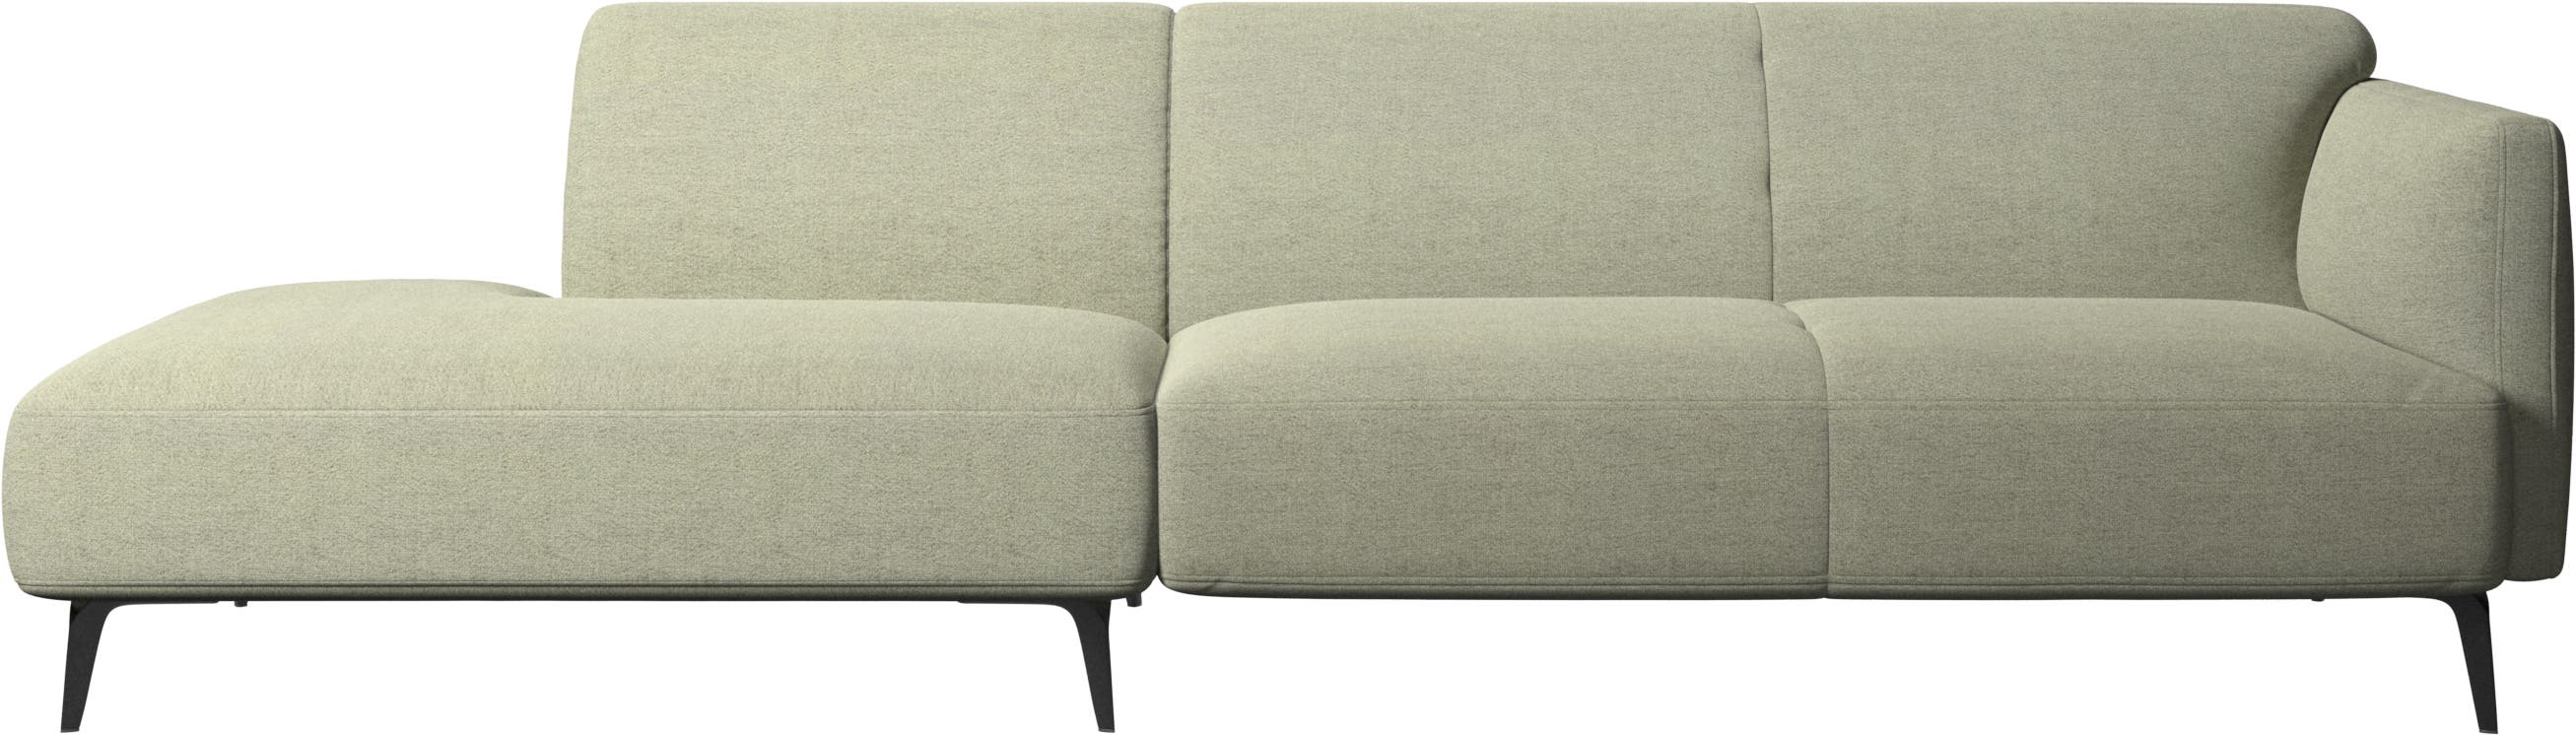 Modena sofa with lounging unit